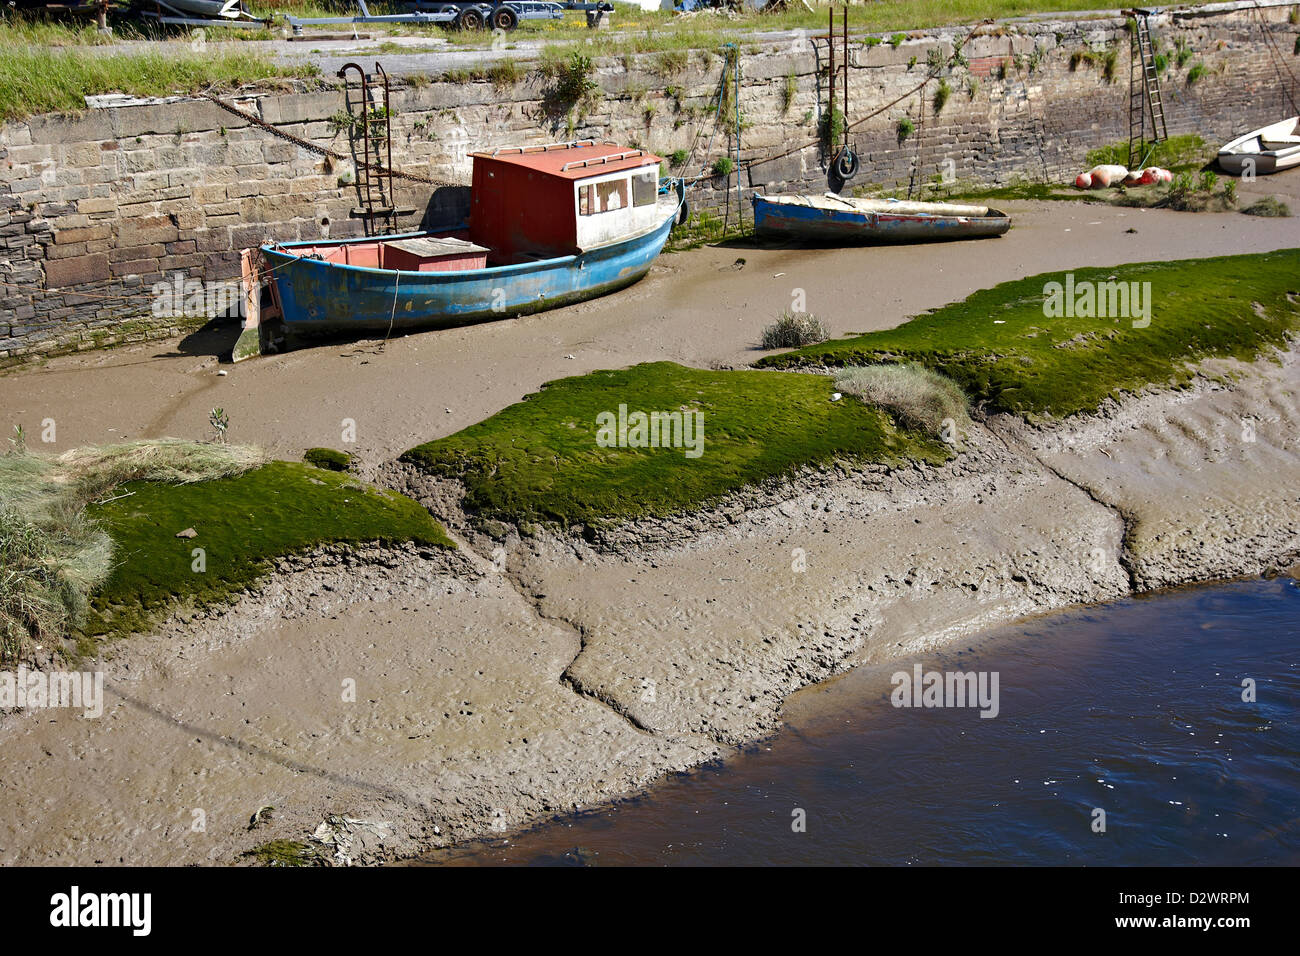 Boats resting on mud banks at low tide up against a retaining wall Stock Photo